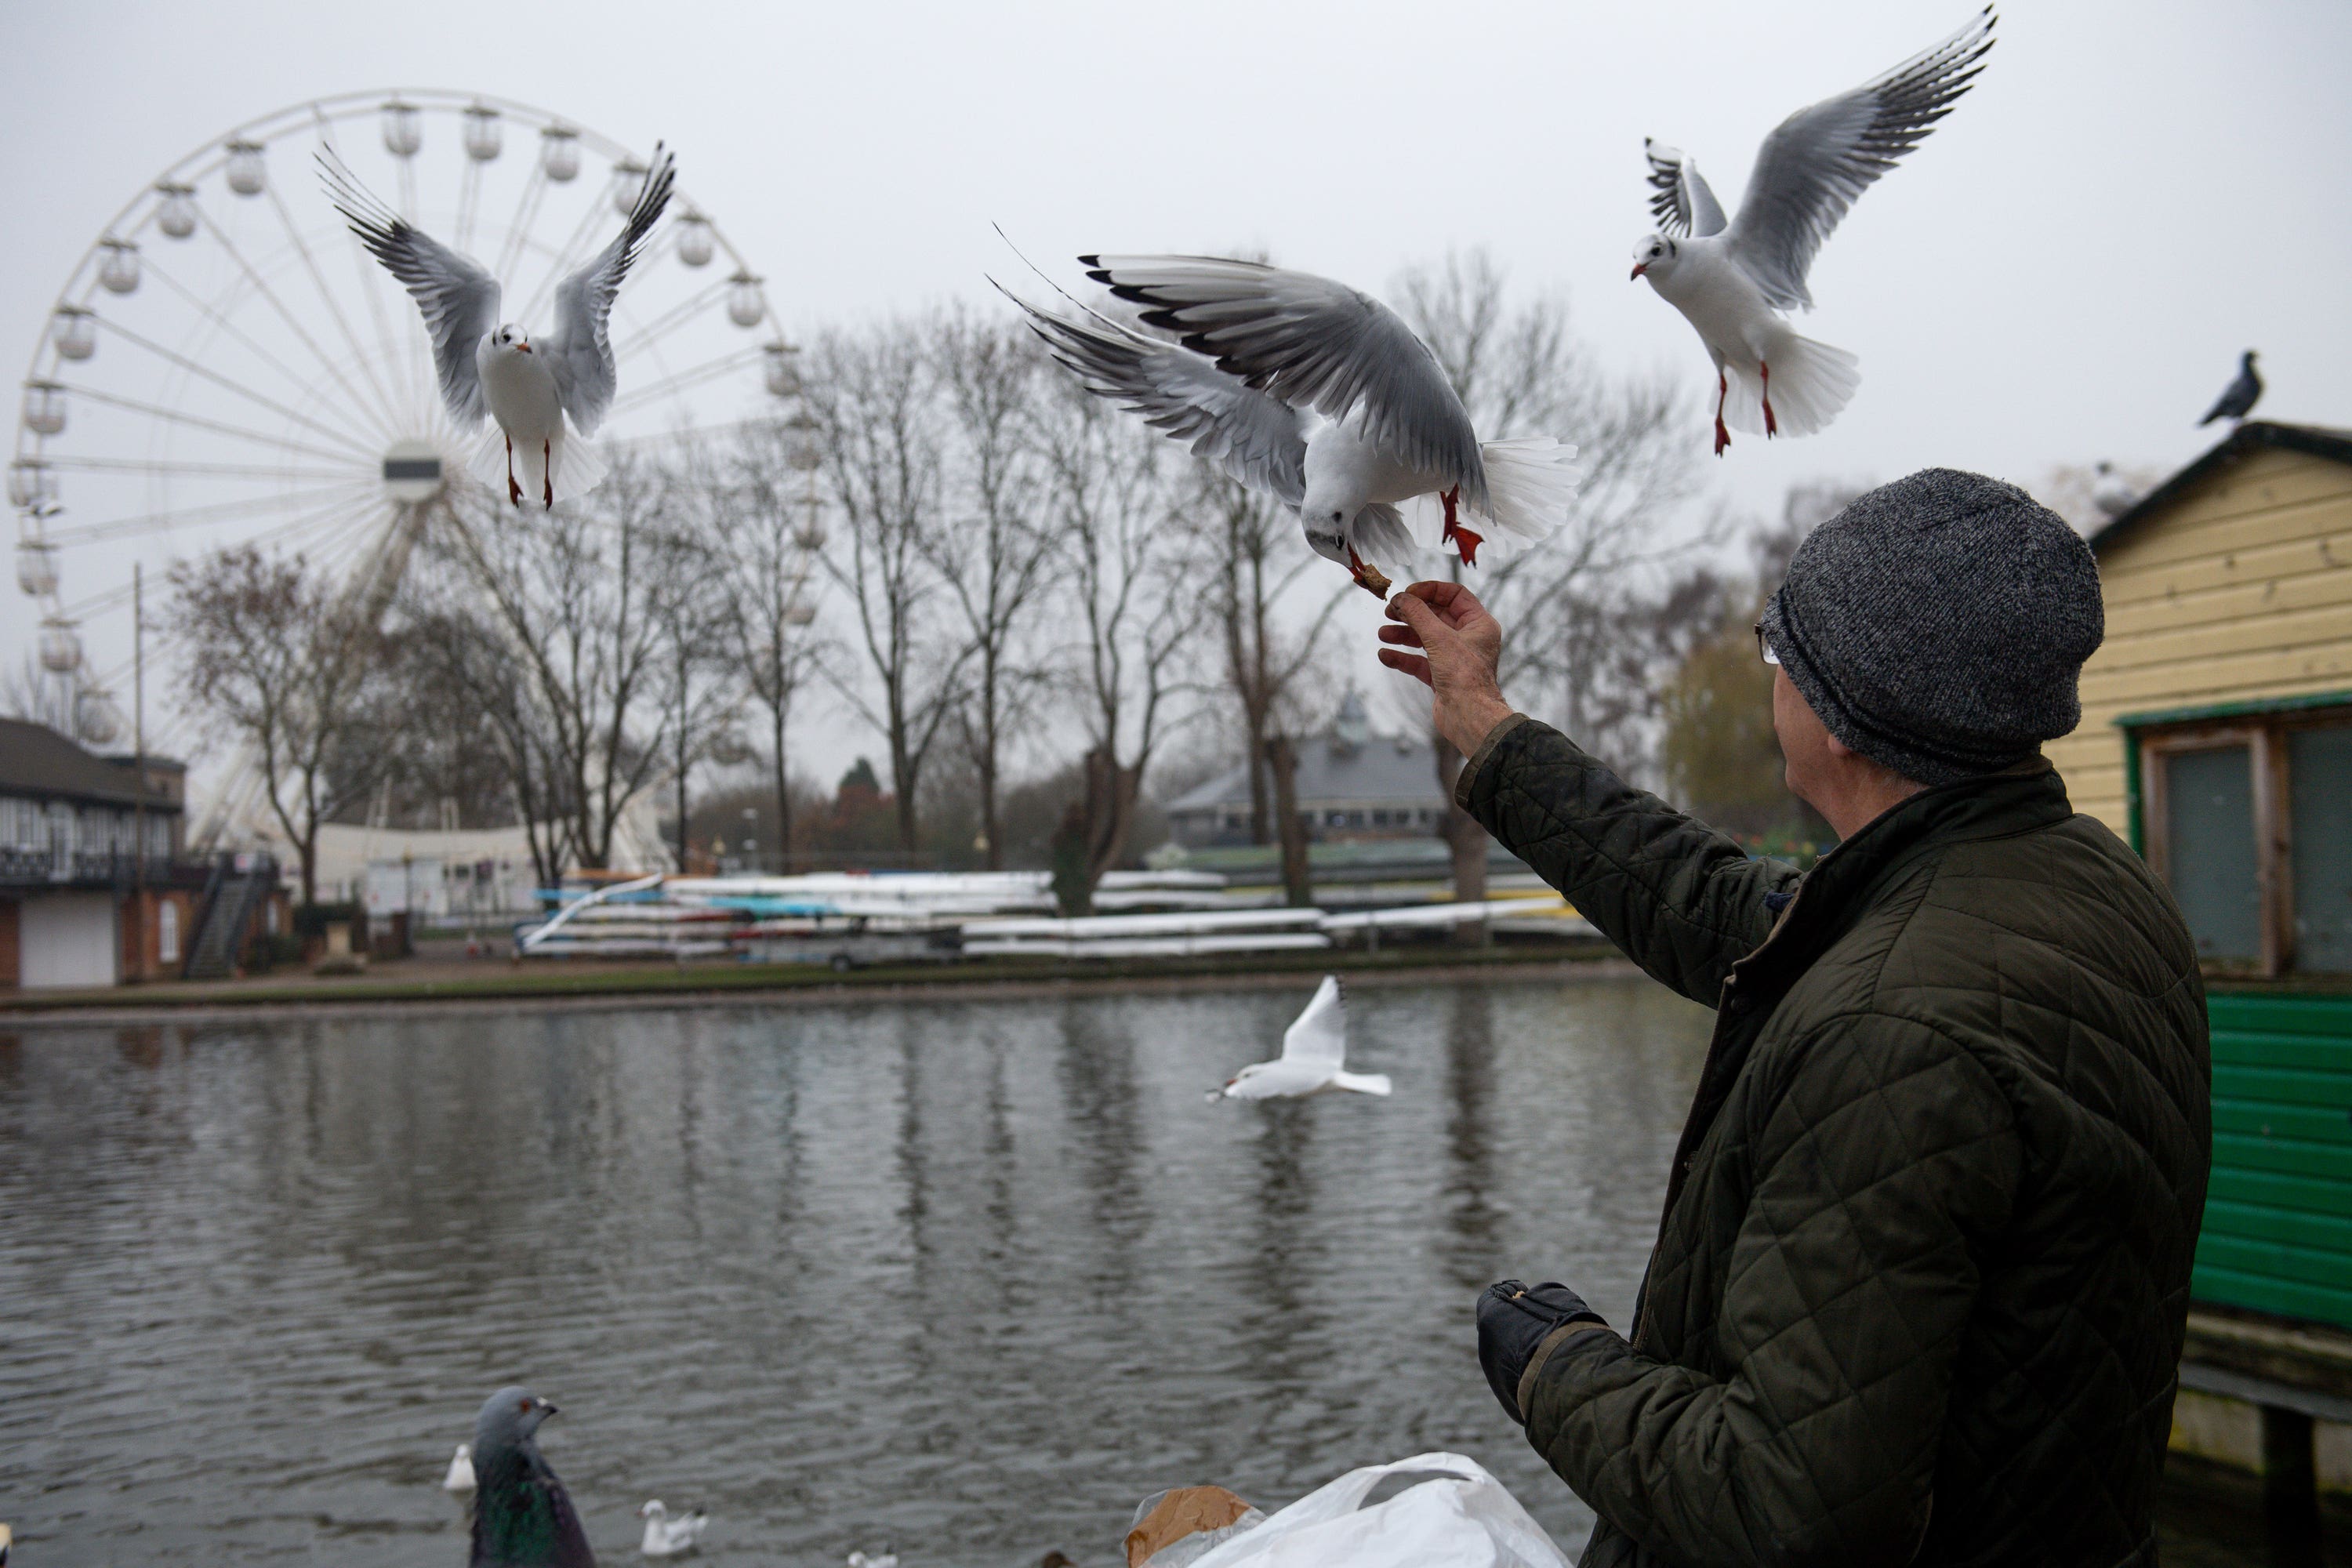 The RSPCA recommends leaving seeds and grains outside for birds struggling to find food in the winter months (Jacob King/PA).